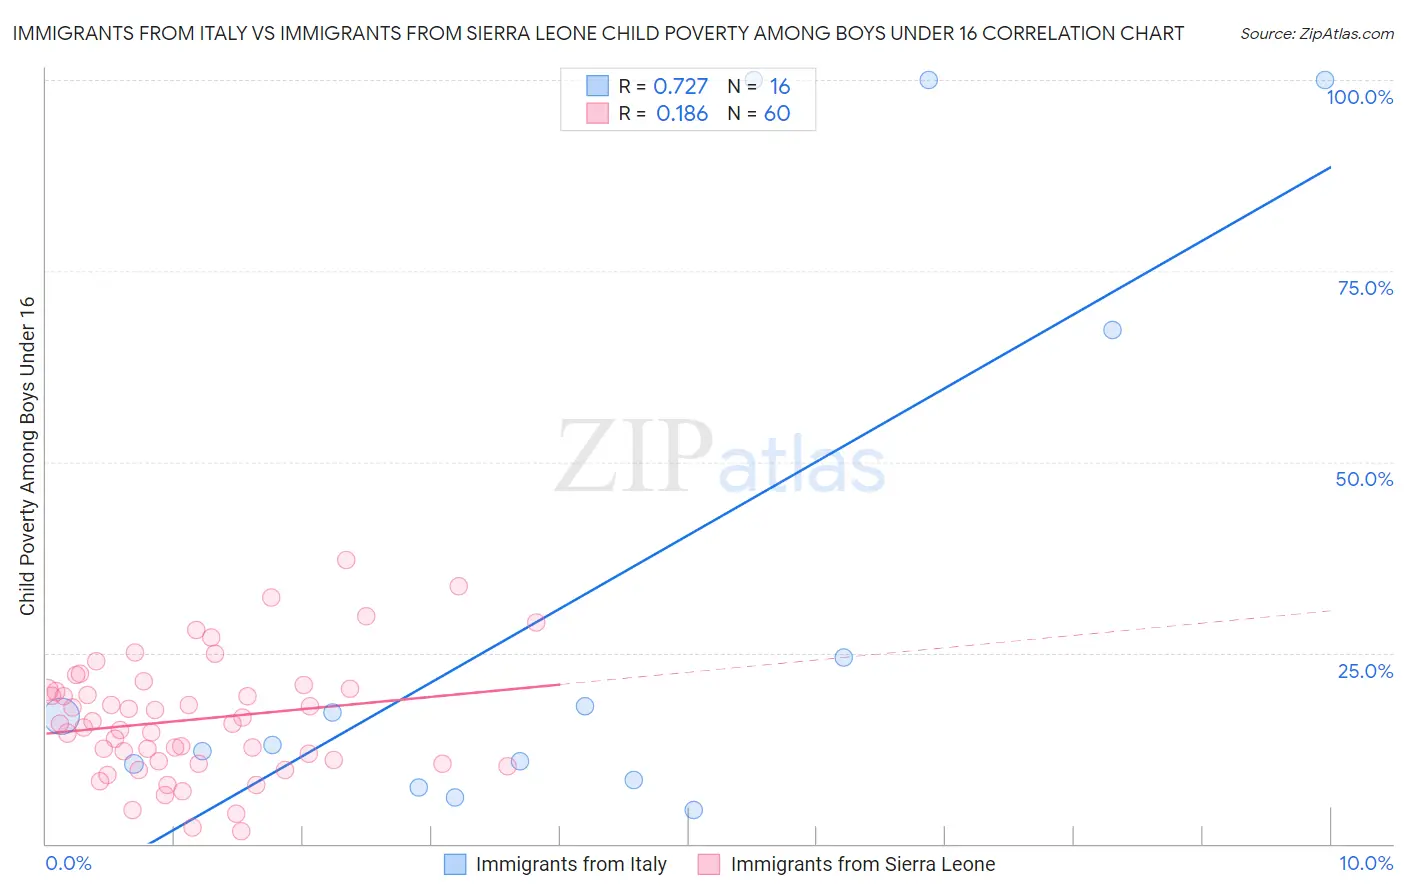 Immigrants from Italy vs Immigrants from Sierra Leone Child Poverty Among Boys Under 16